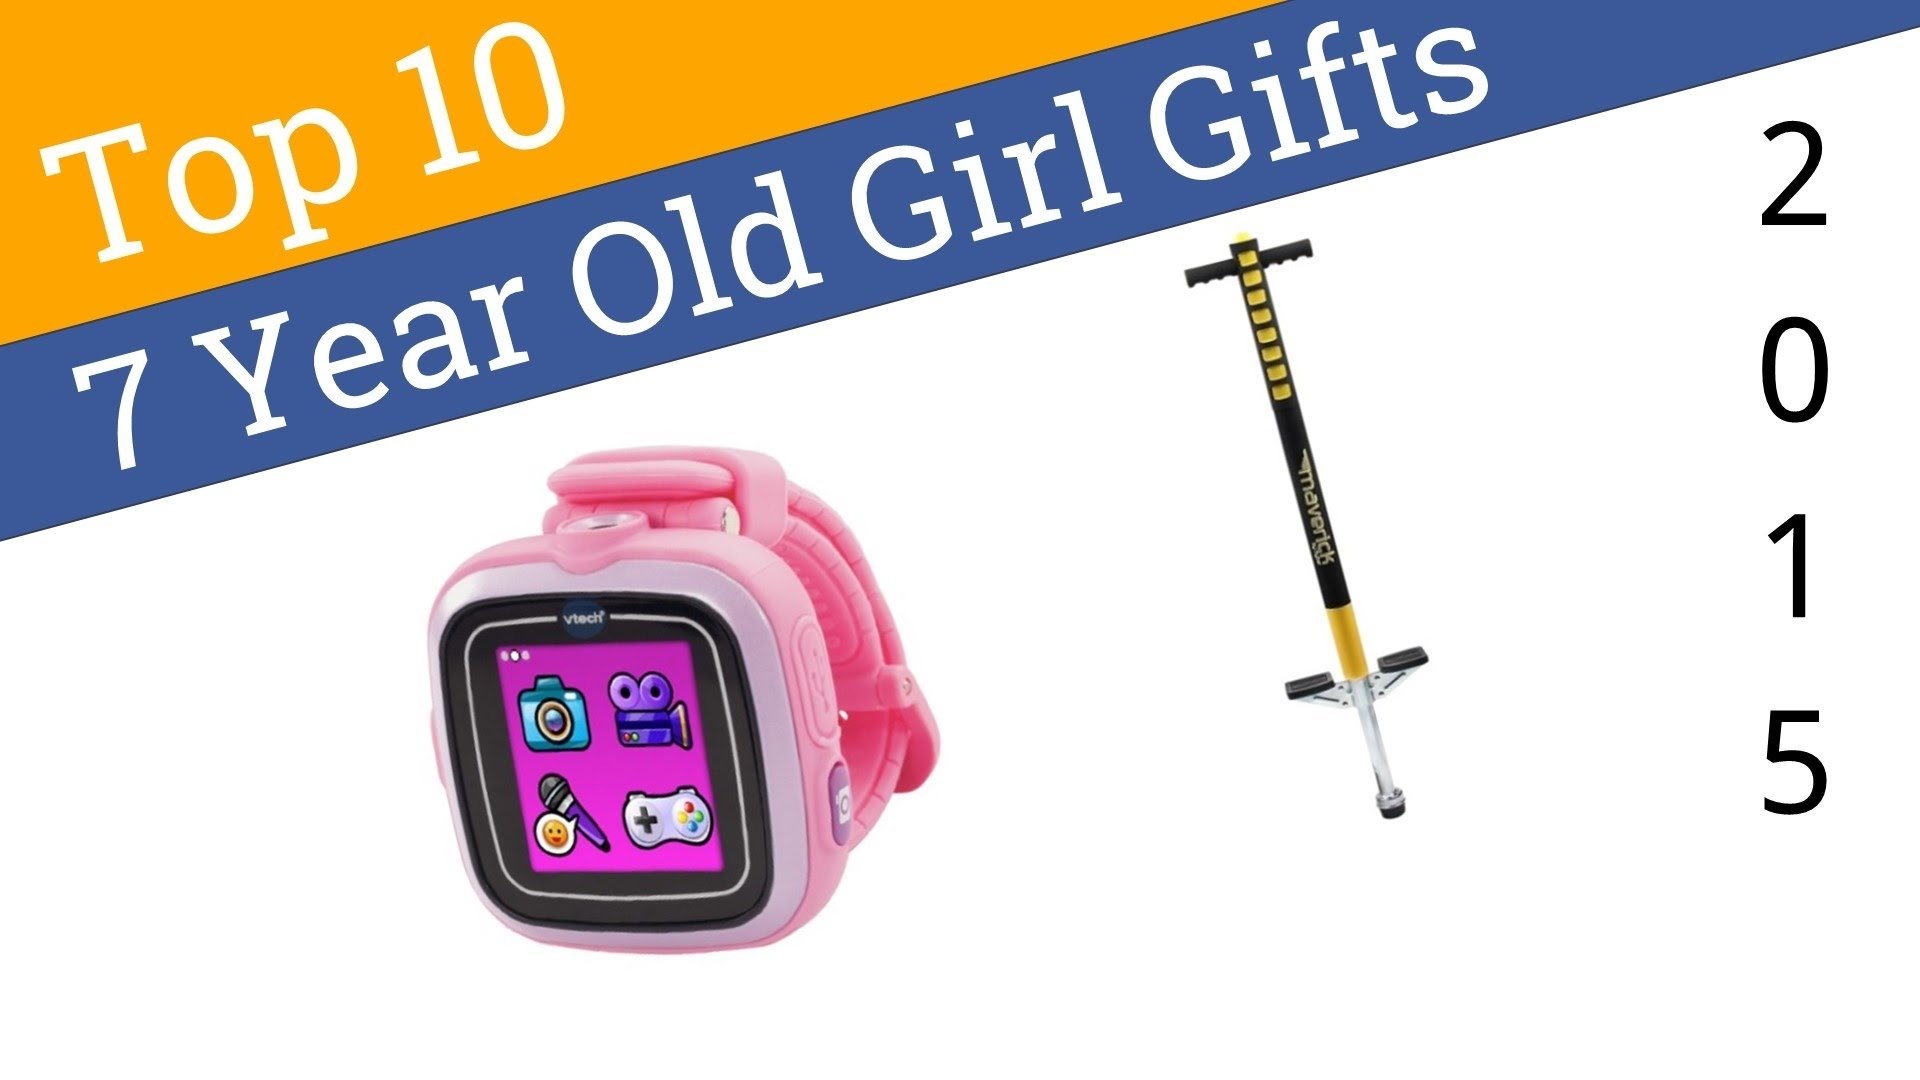 10 Pretty Gift Ideas For 7 Yr Old Girl 10 best 7 year old girl gifts 2015 youtube 1 2022